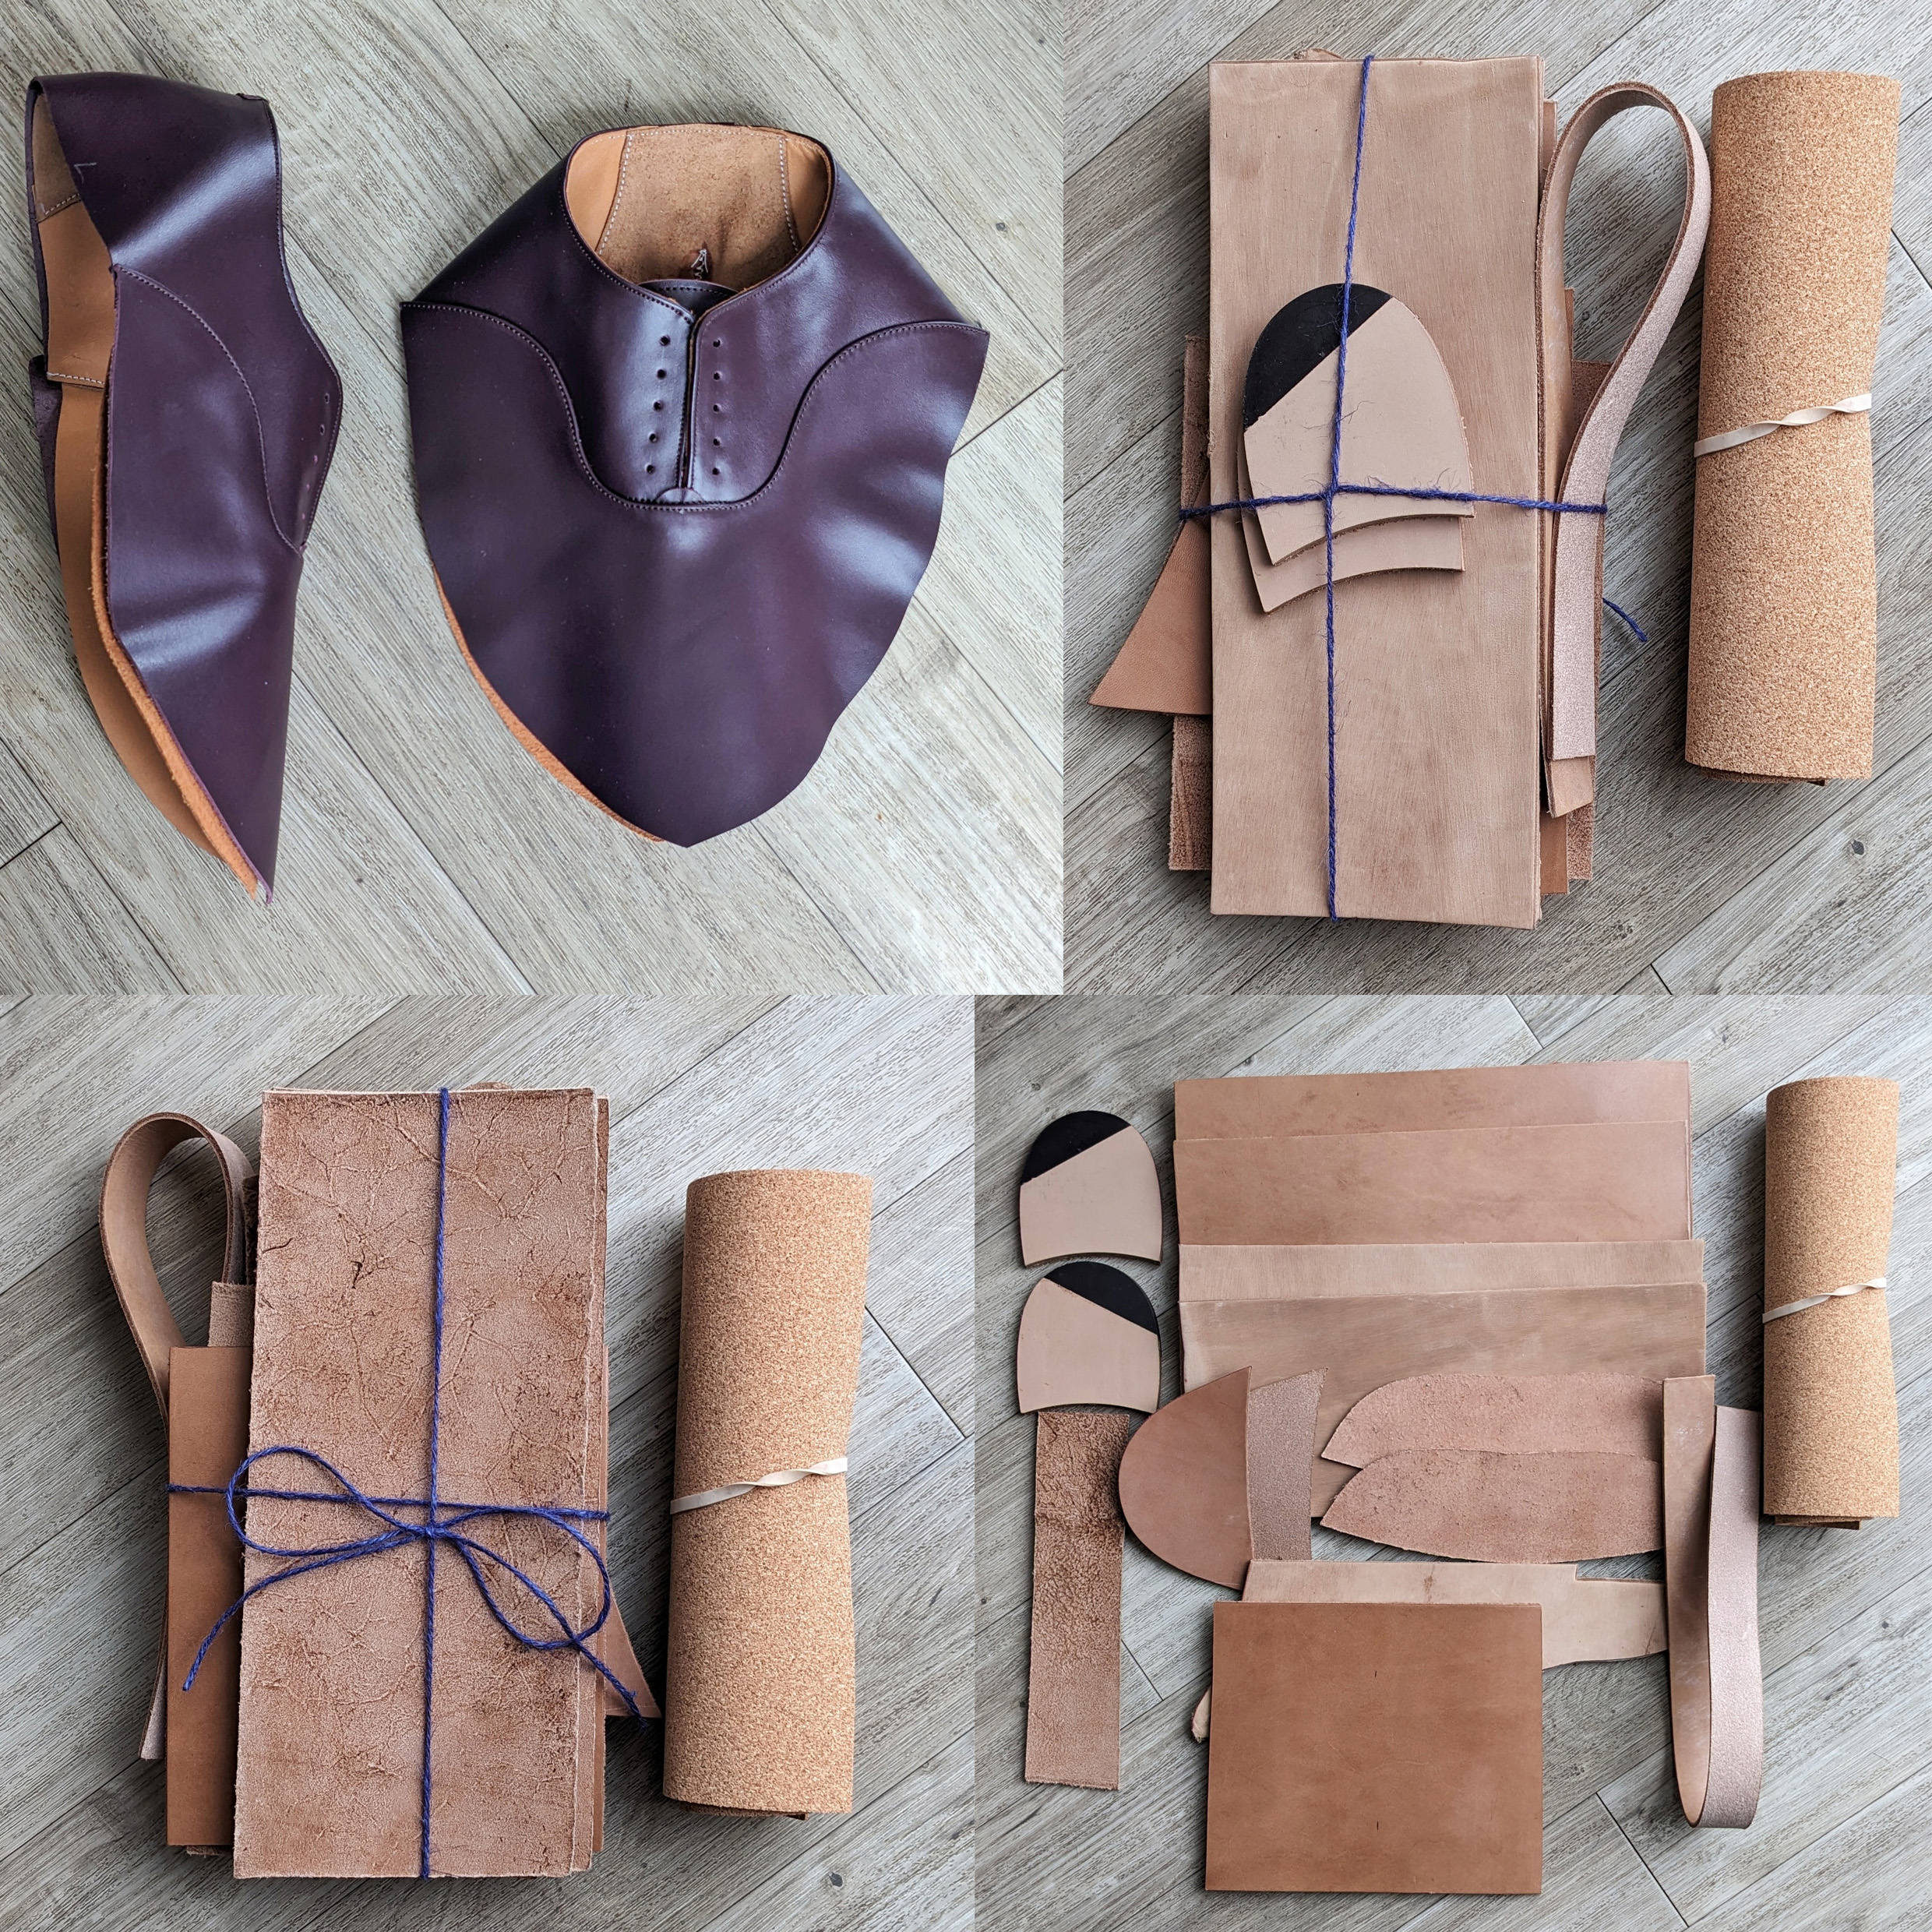 Shoe Making Kit with uppers, Make your own shoes